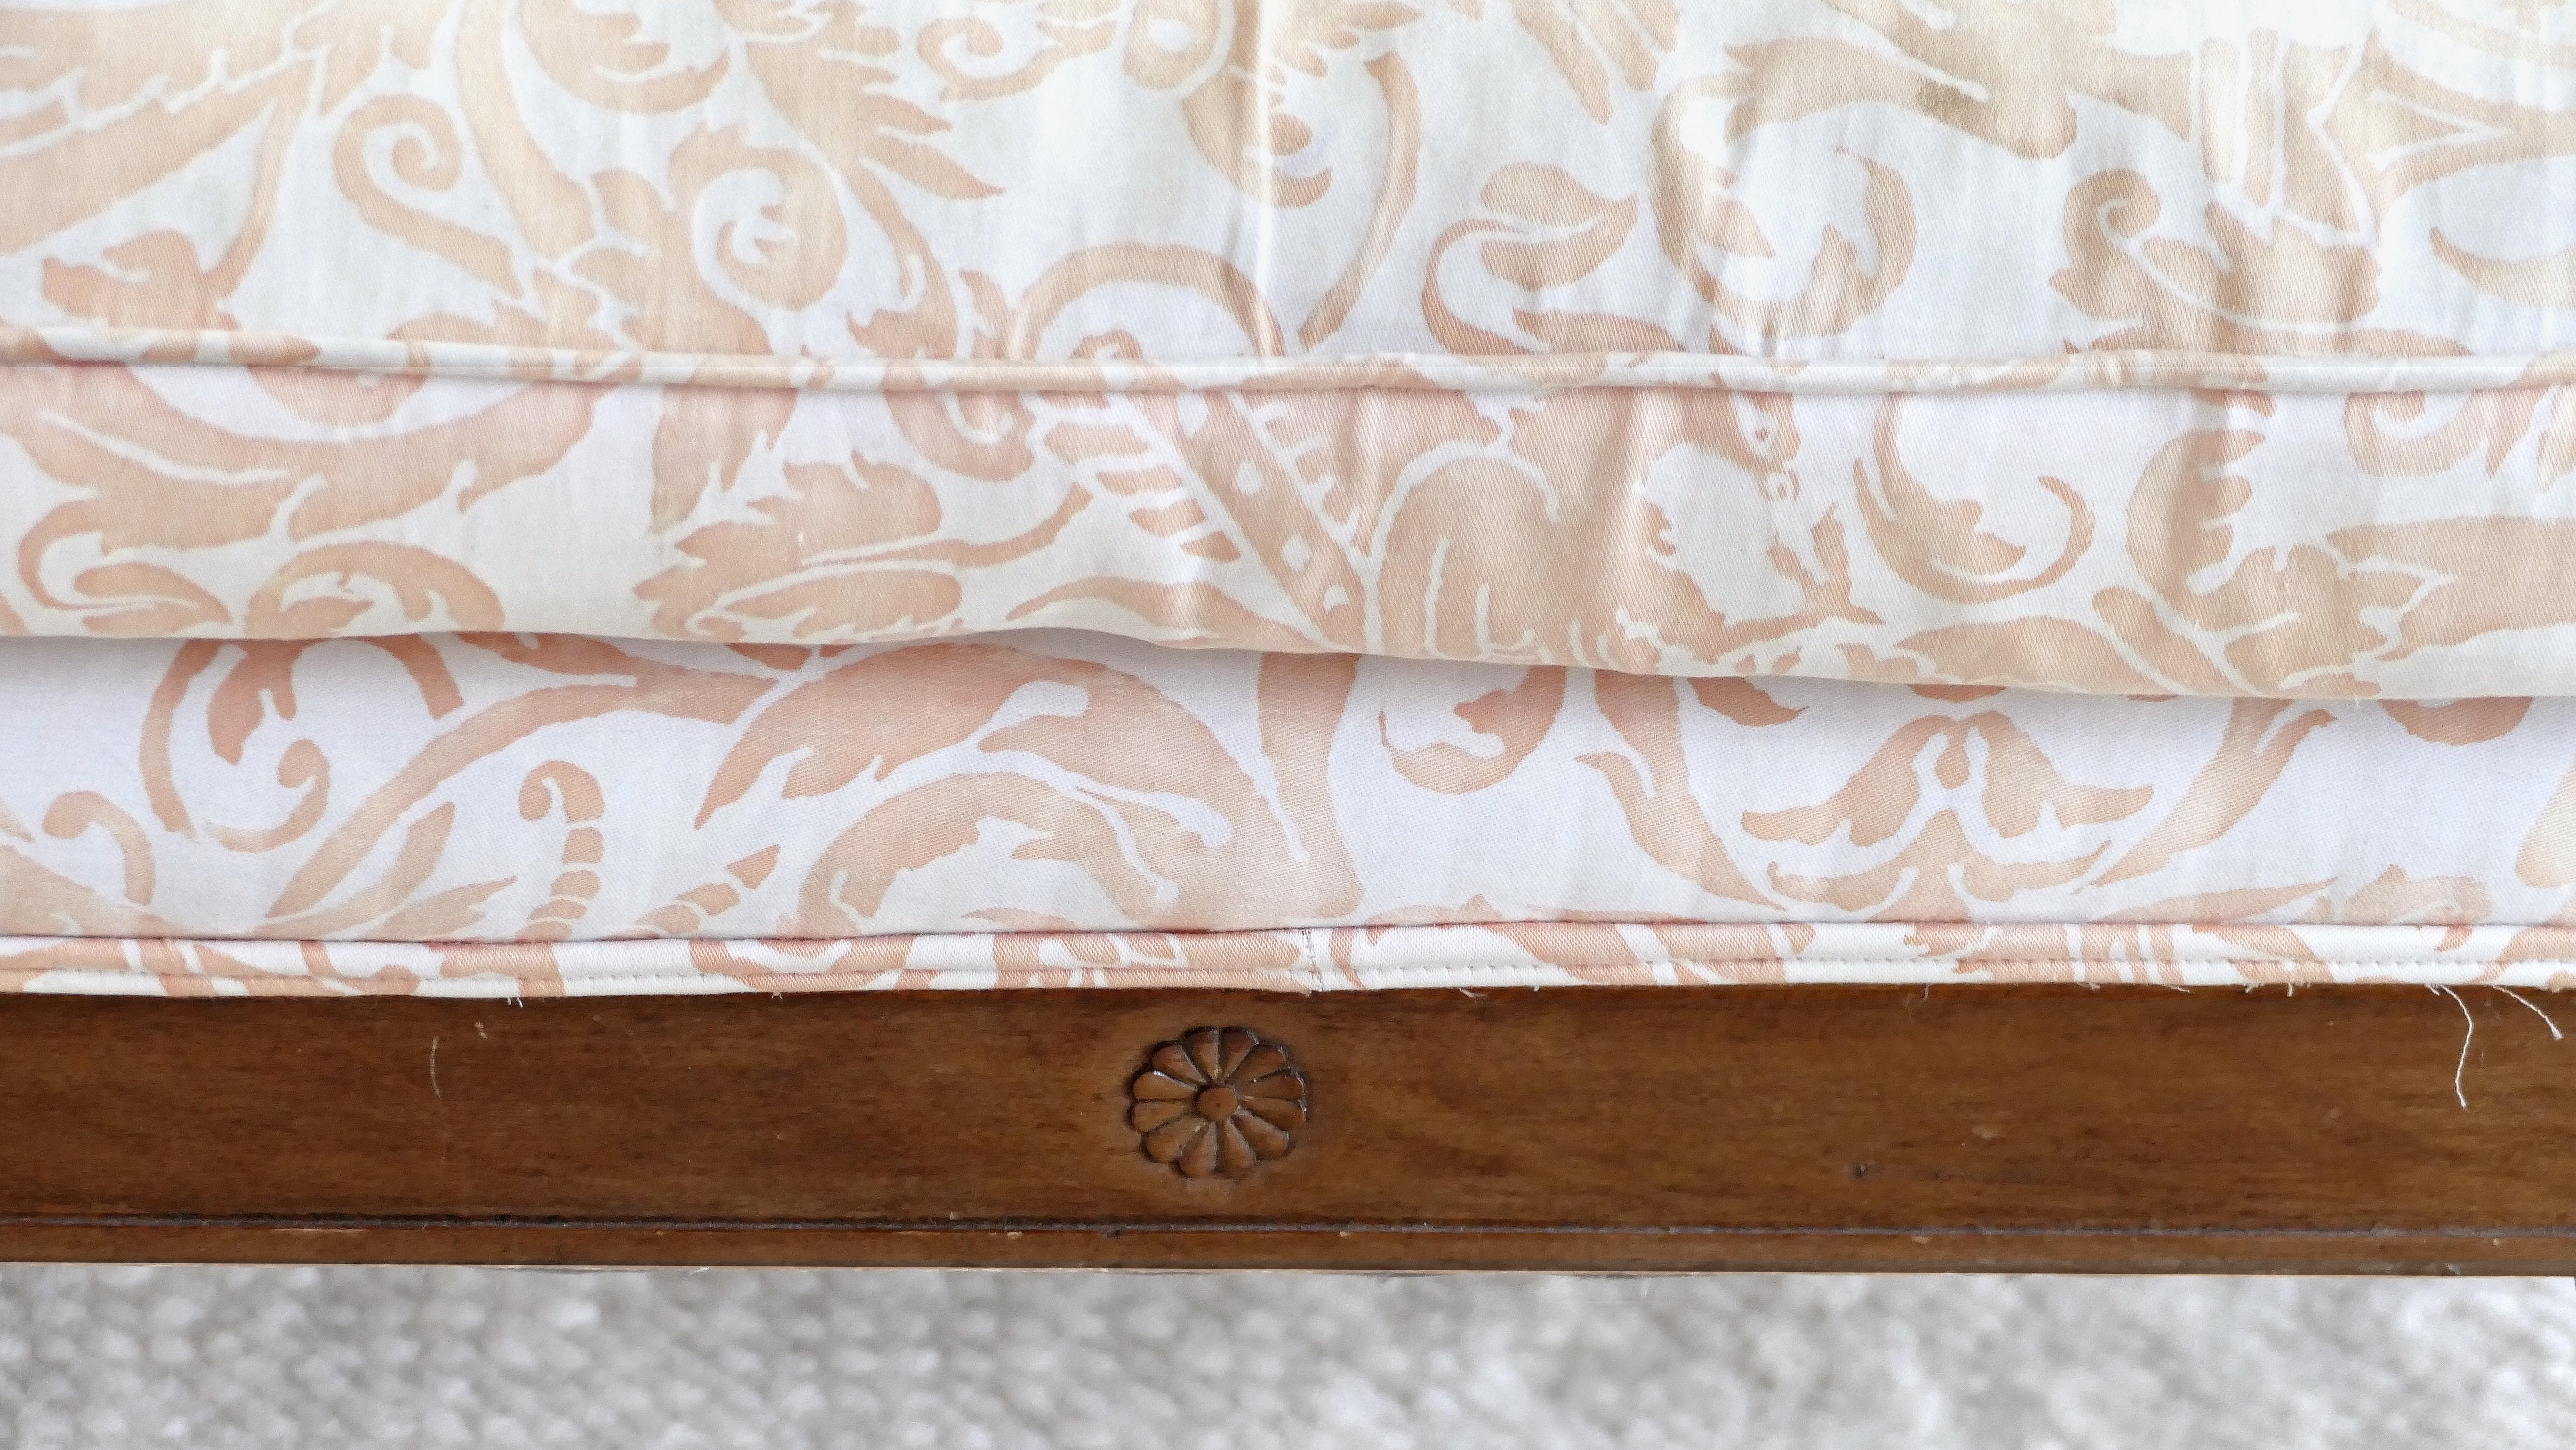 19th Century Antique Chaise Lounge Upholstered in Fortuny Fabric with a Carved Wood Frame